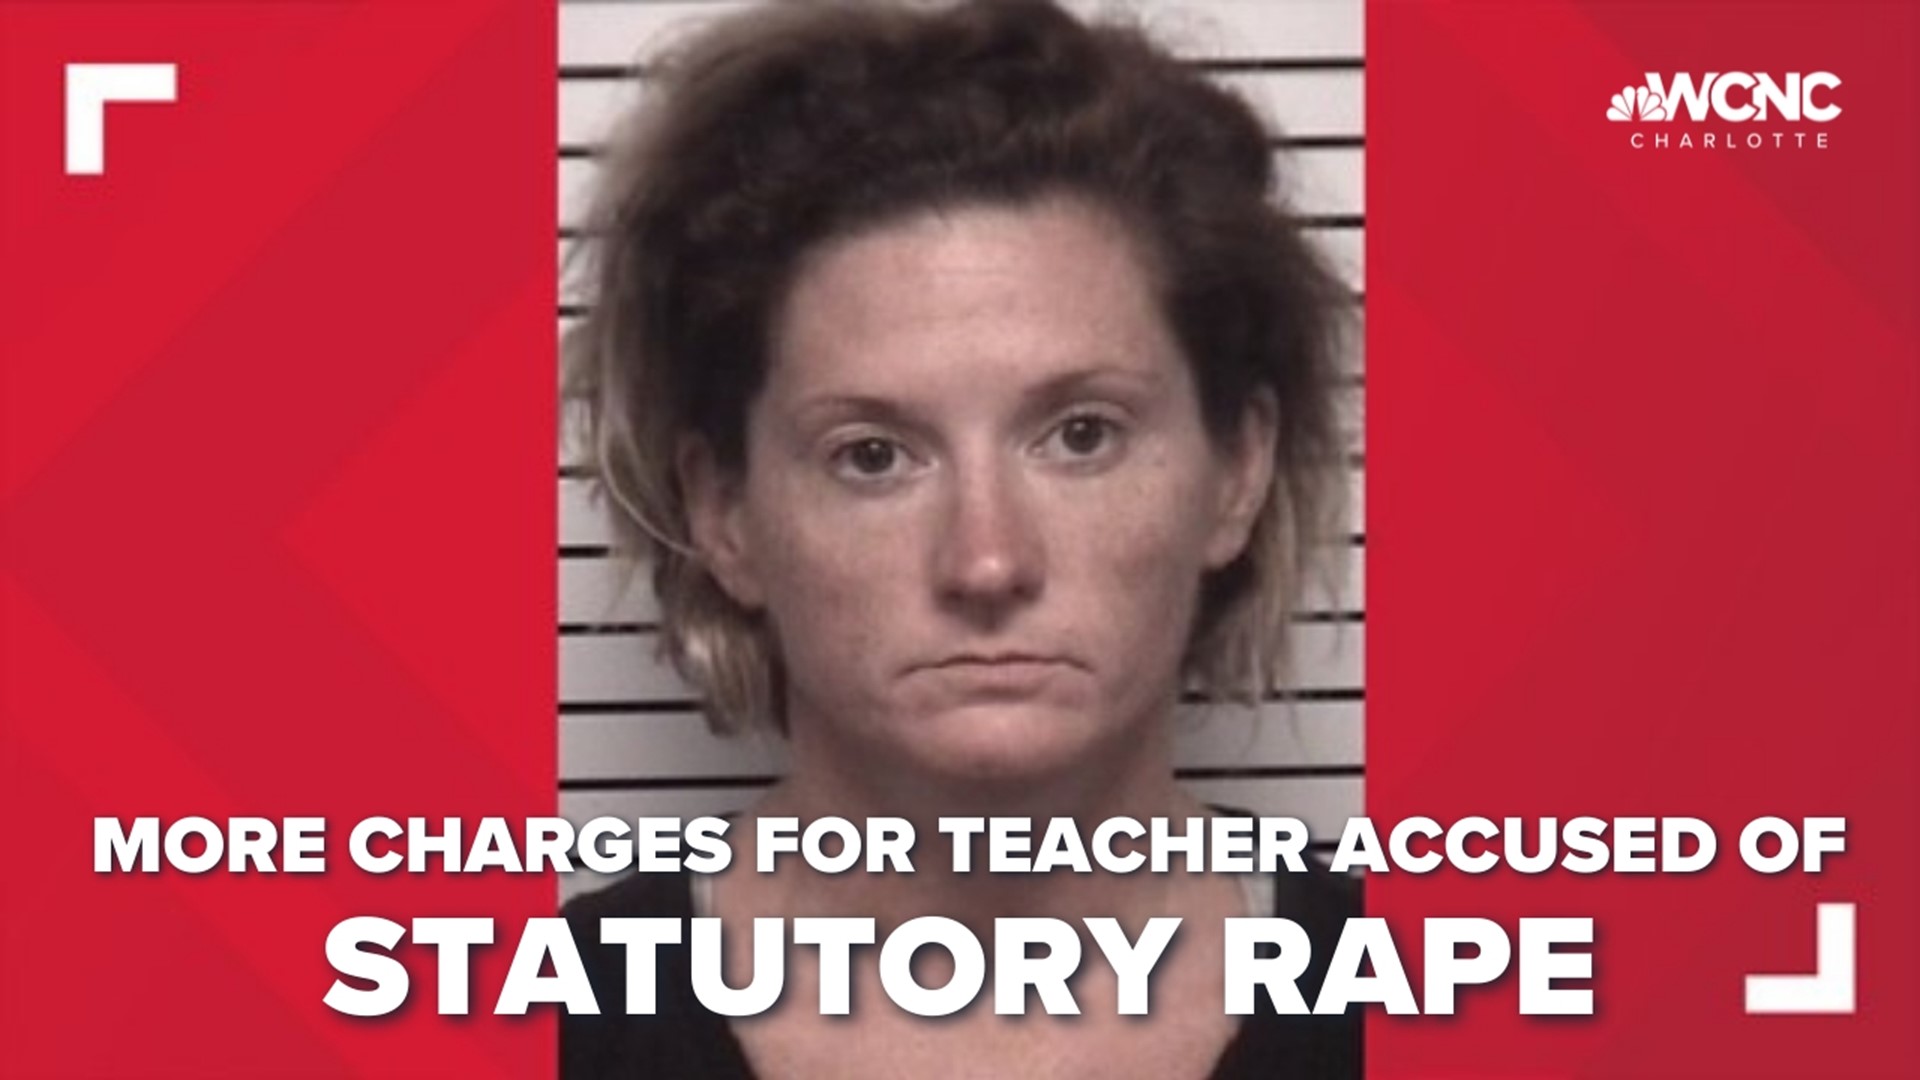 An Iredell County teacher charged for engaging in sexual activities with a minor was served two more arrest warrants.